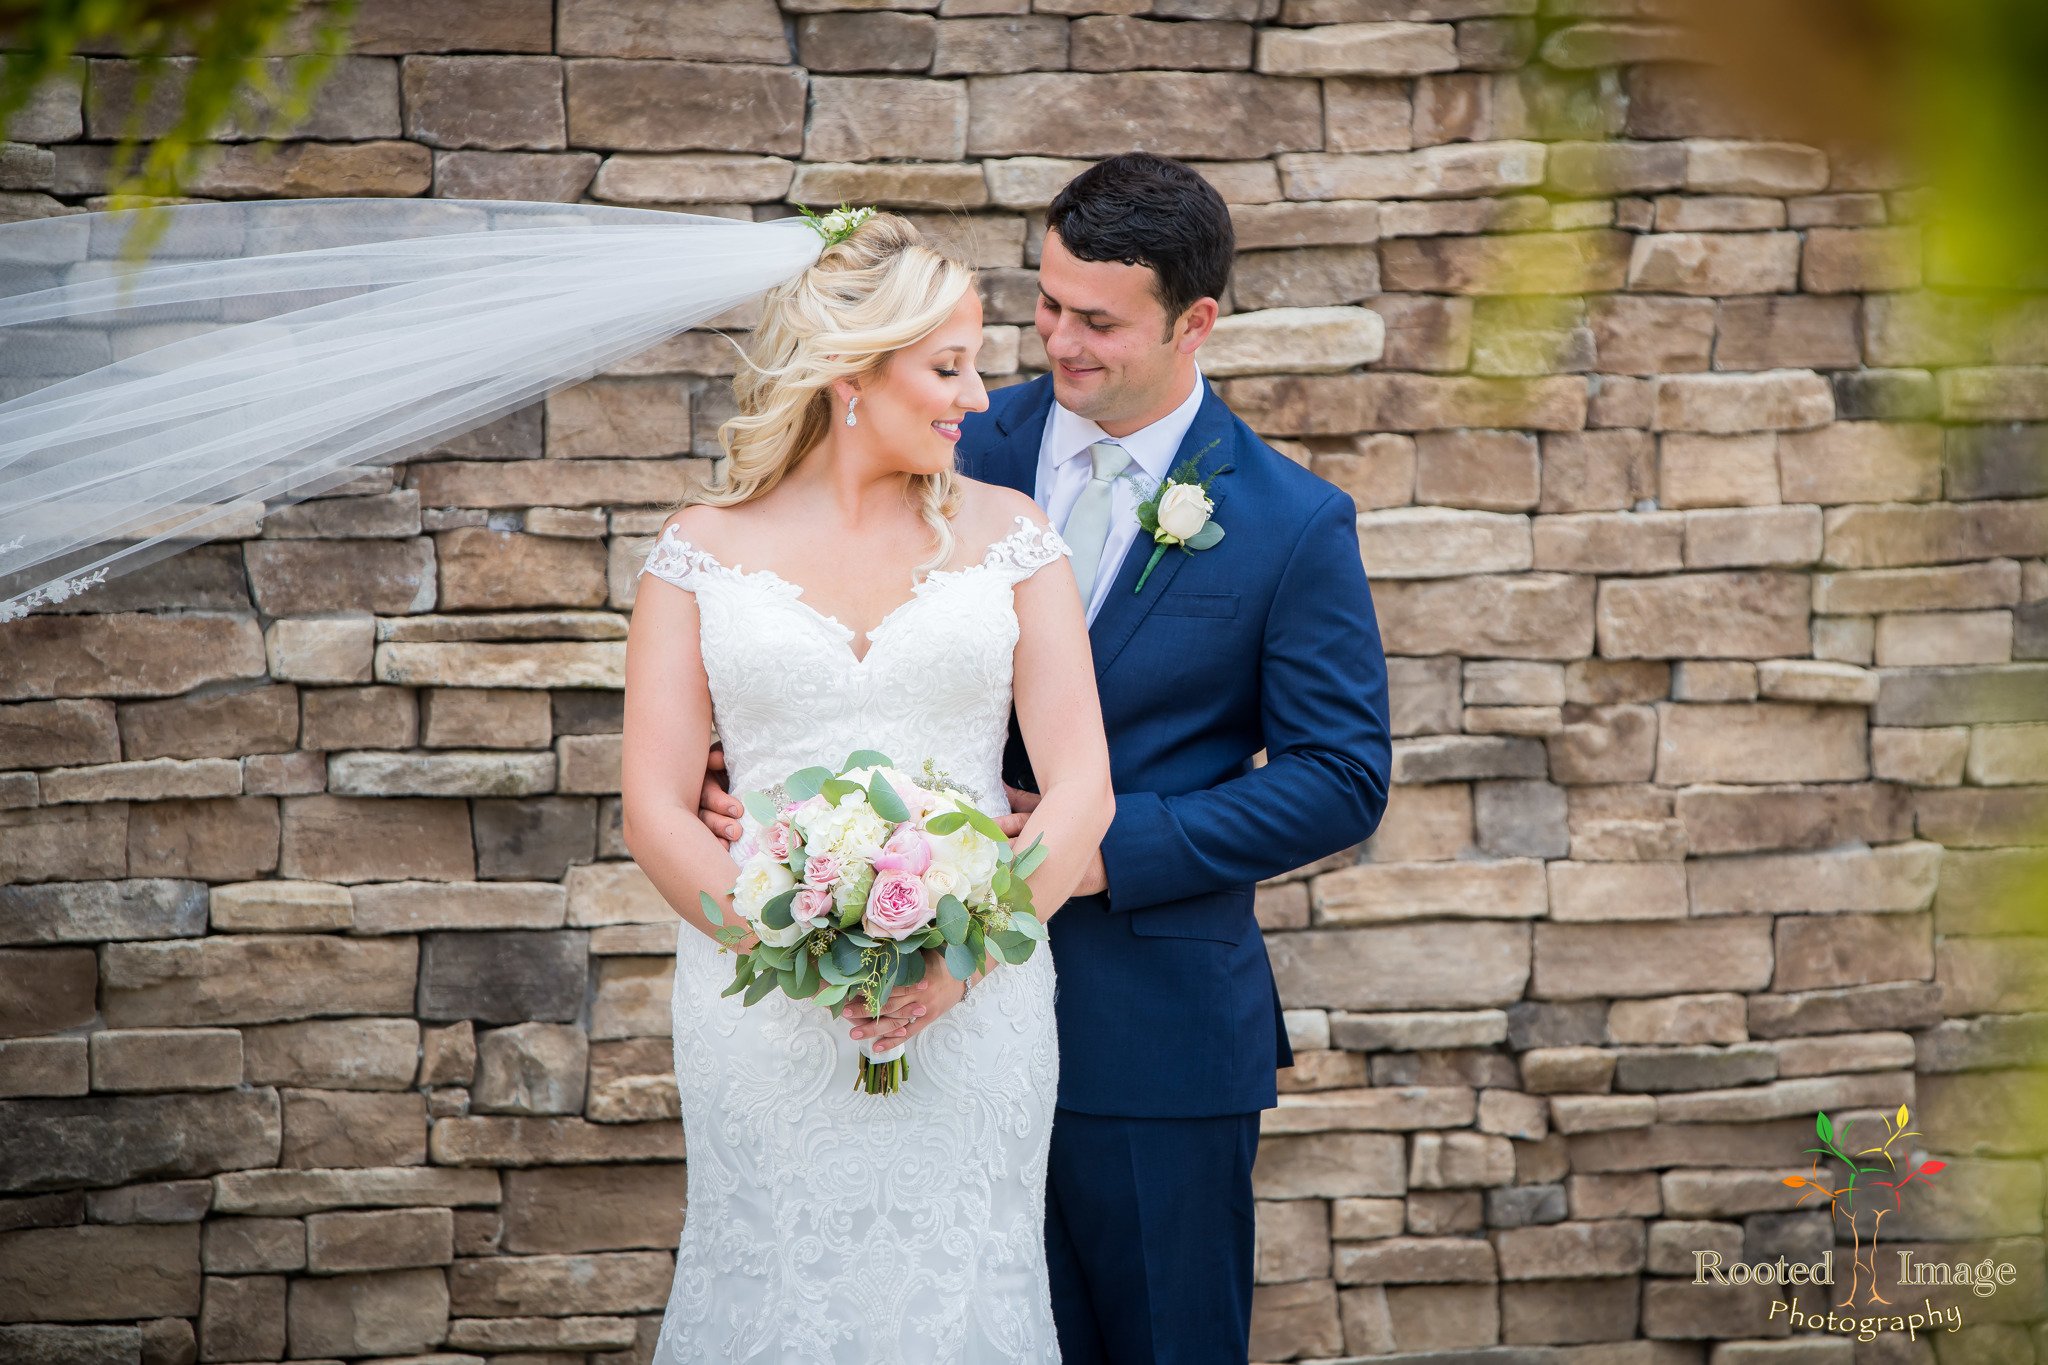 Bear Creek Mountain Resort Wedding by DPNAK Events with Alisha Nycole and Co. and Rooted Image Photography